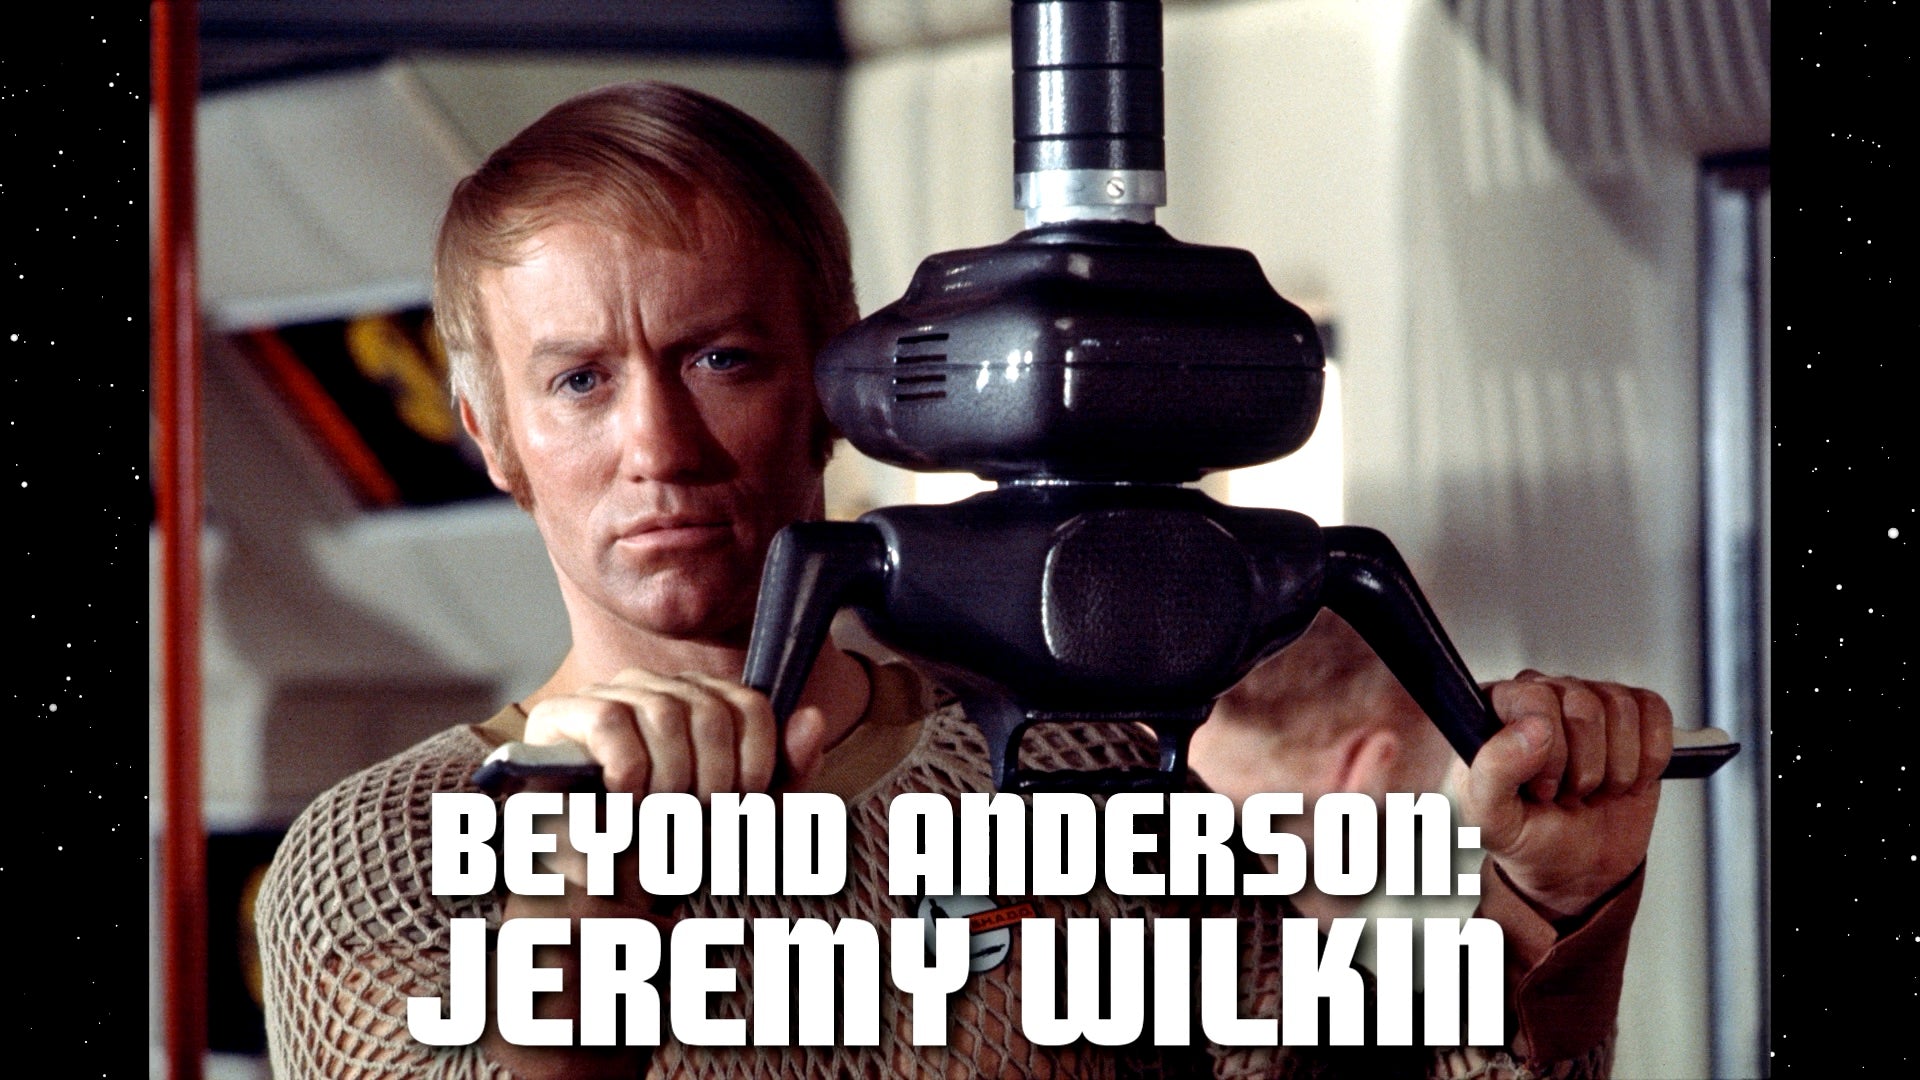 Early Release - New Beyond Anderson - The Gerry Anderson Store